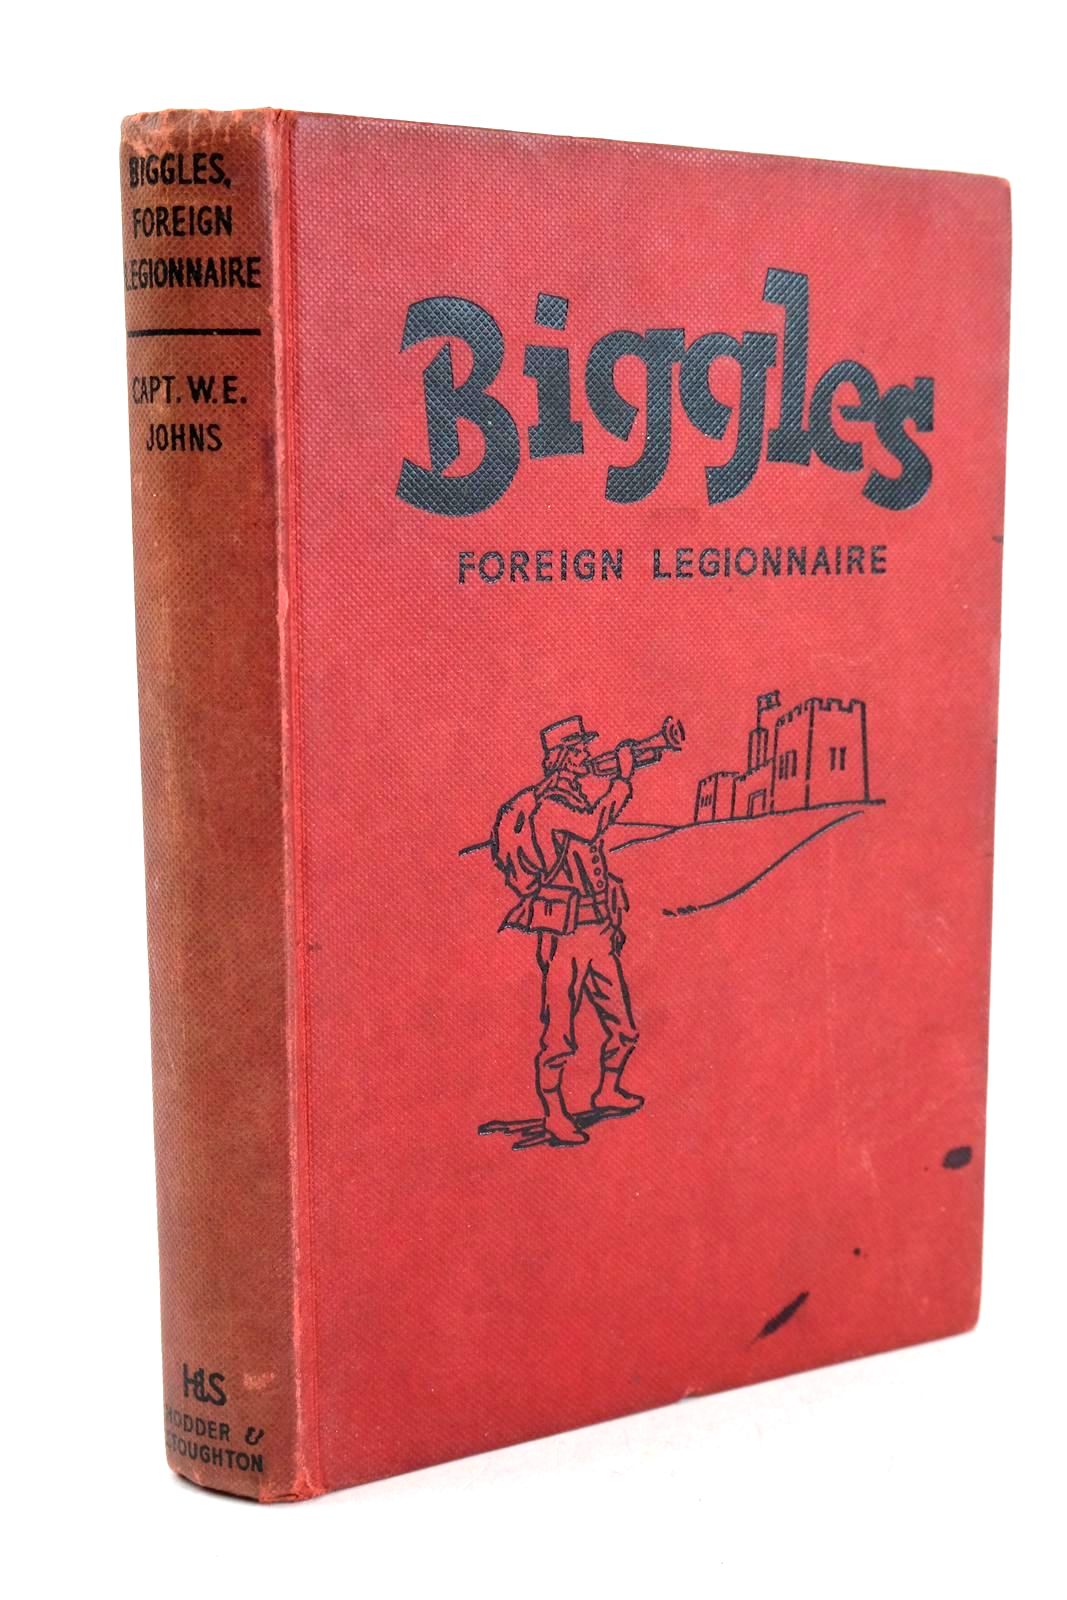 Photo of BIGGLES FOREIGN LEGIONNAIRE- Stock Number: 1326596